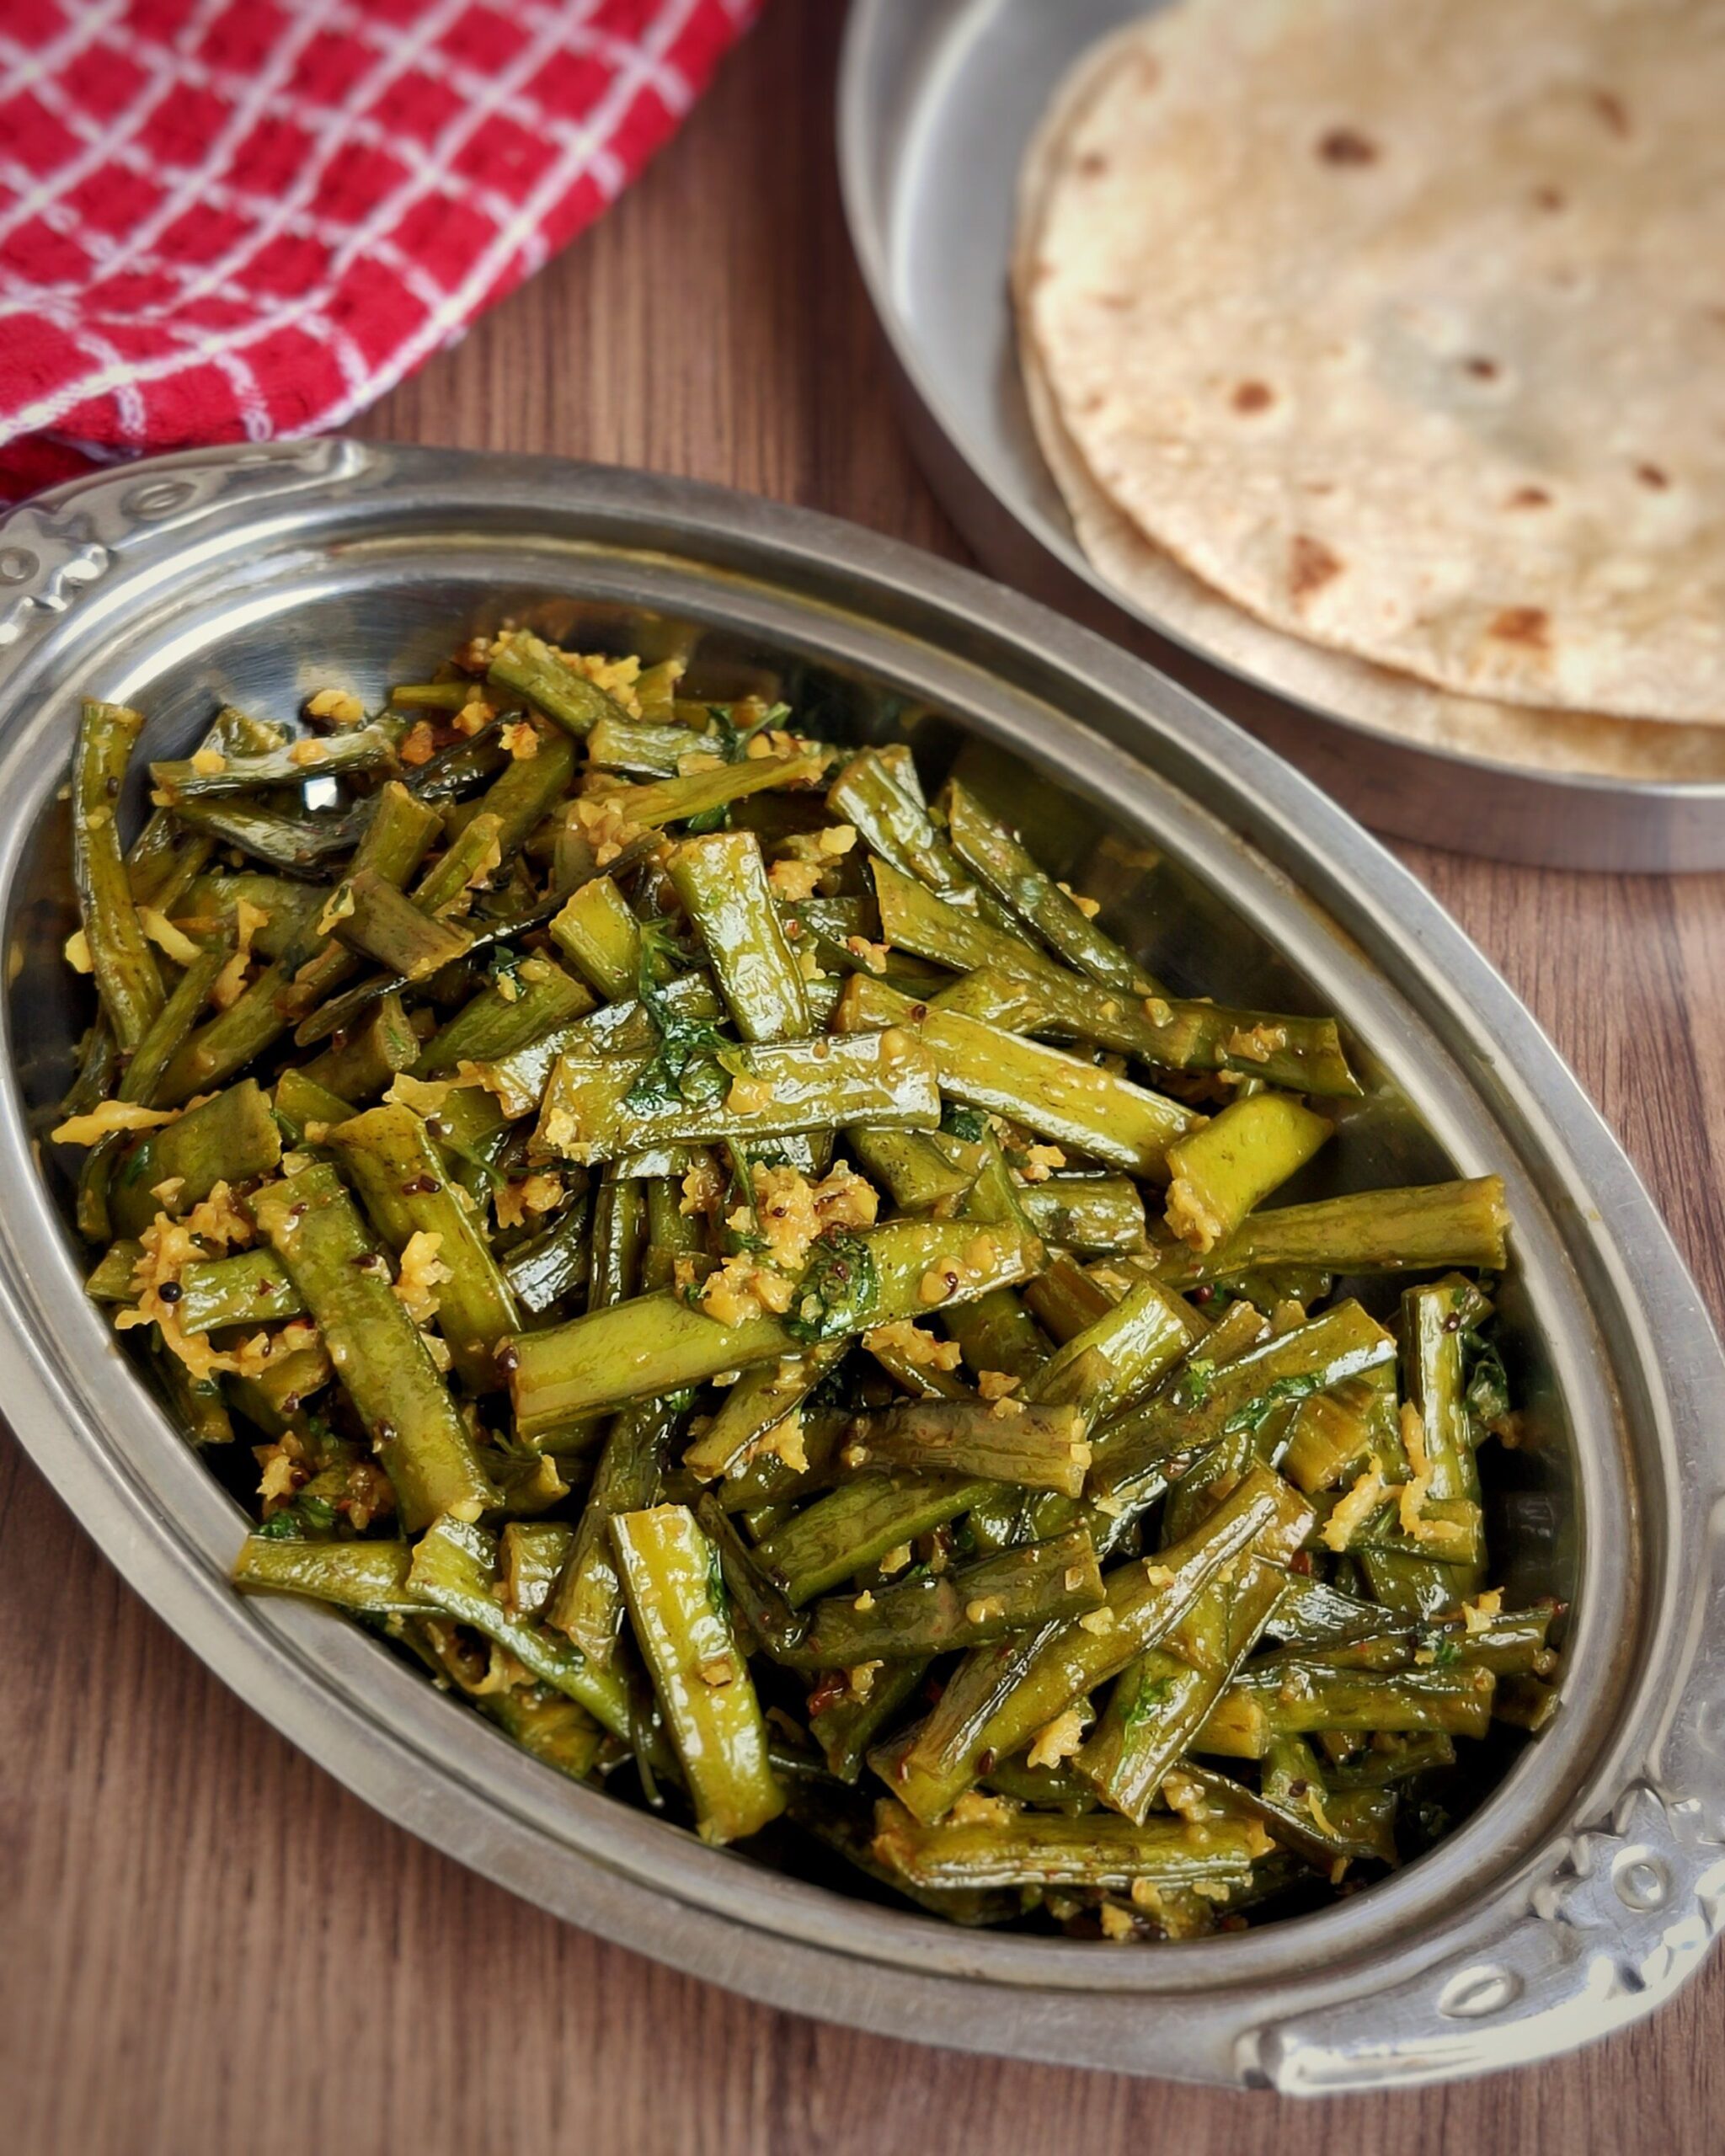 Gavar Nu Shaak| Gujarati Cluster Beans Curry Images | Wallmost